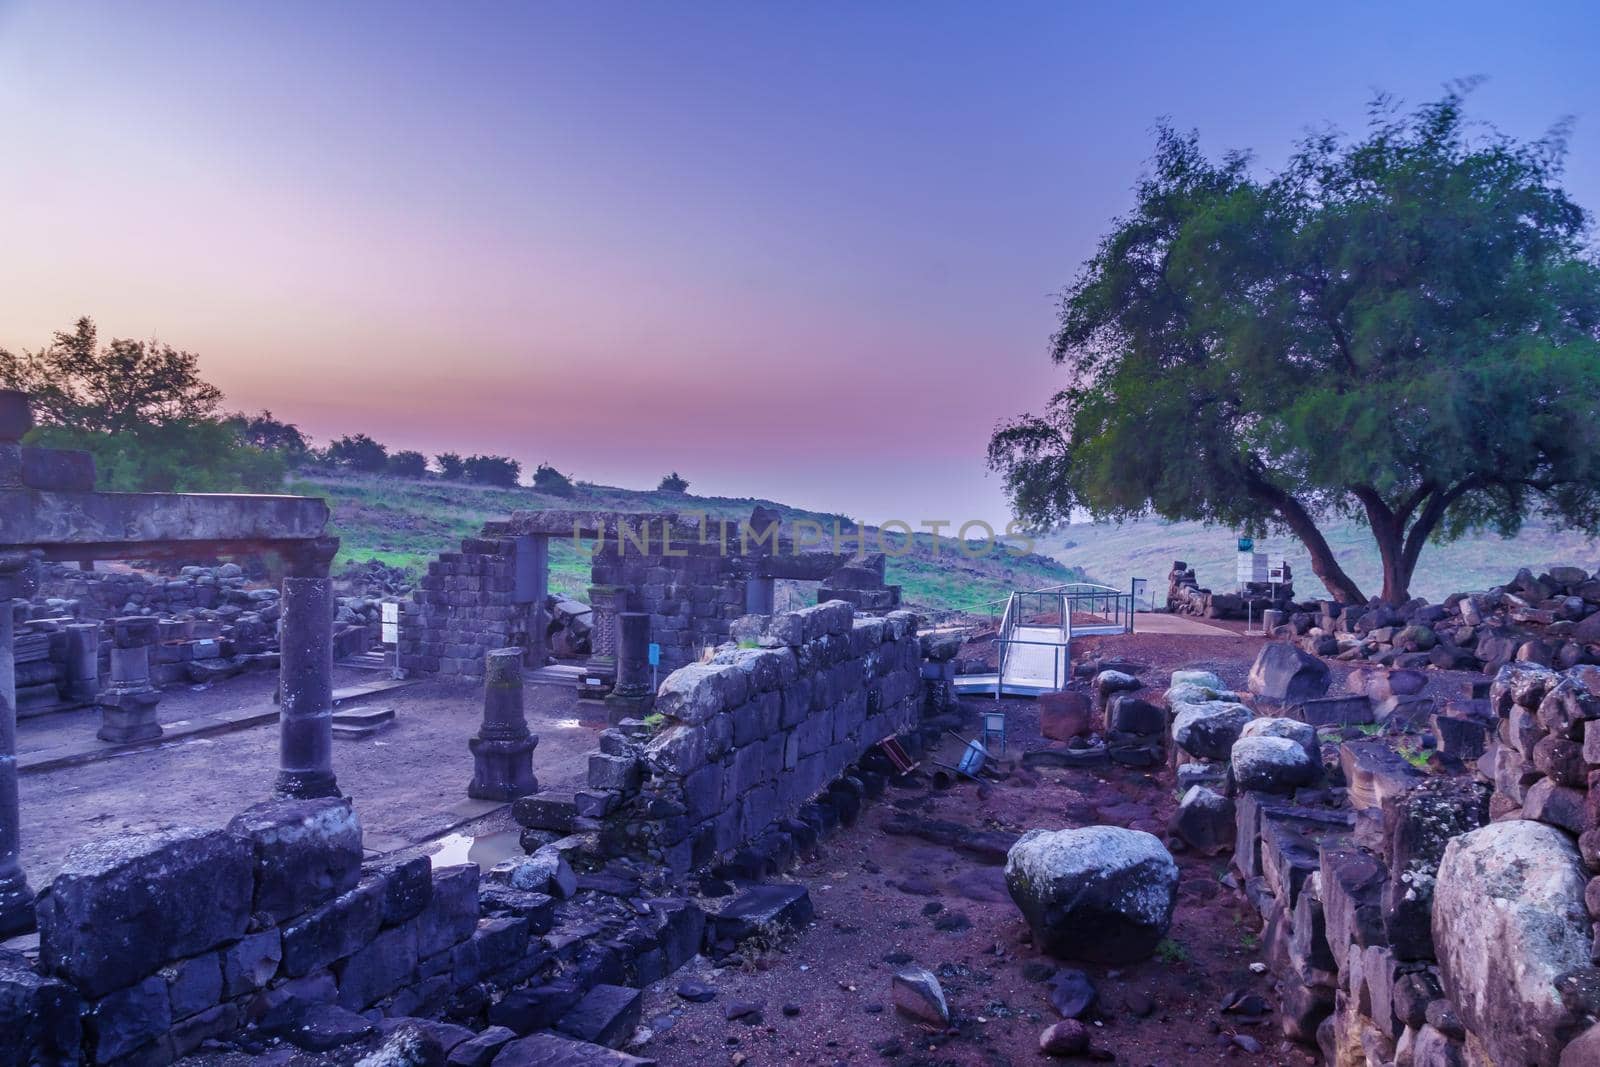 Blue hour (before sunrise) view of the remains of the synagogue of Chorazin (Korazim). Now a National Park in Northern Israel. According to Christian tradition, Jesus preached here and later cursed